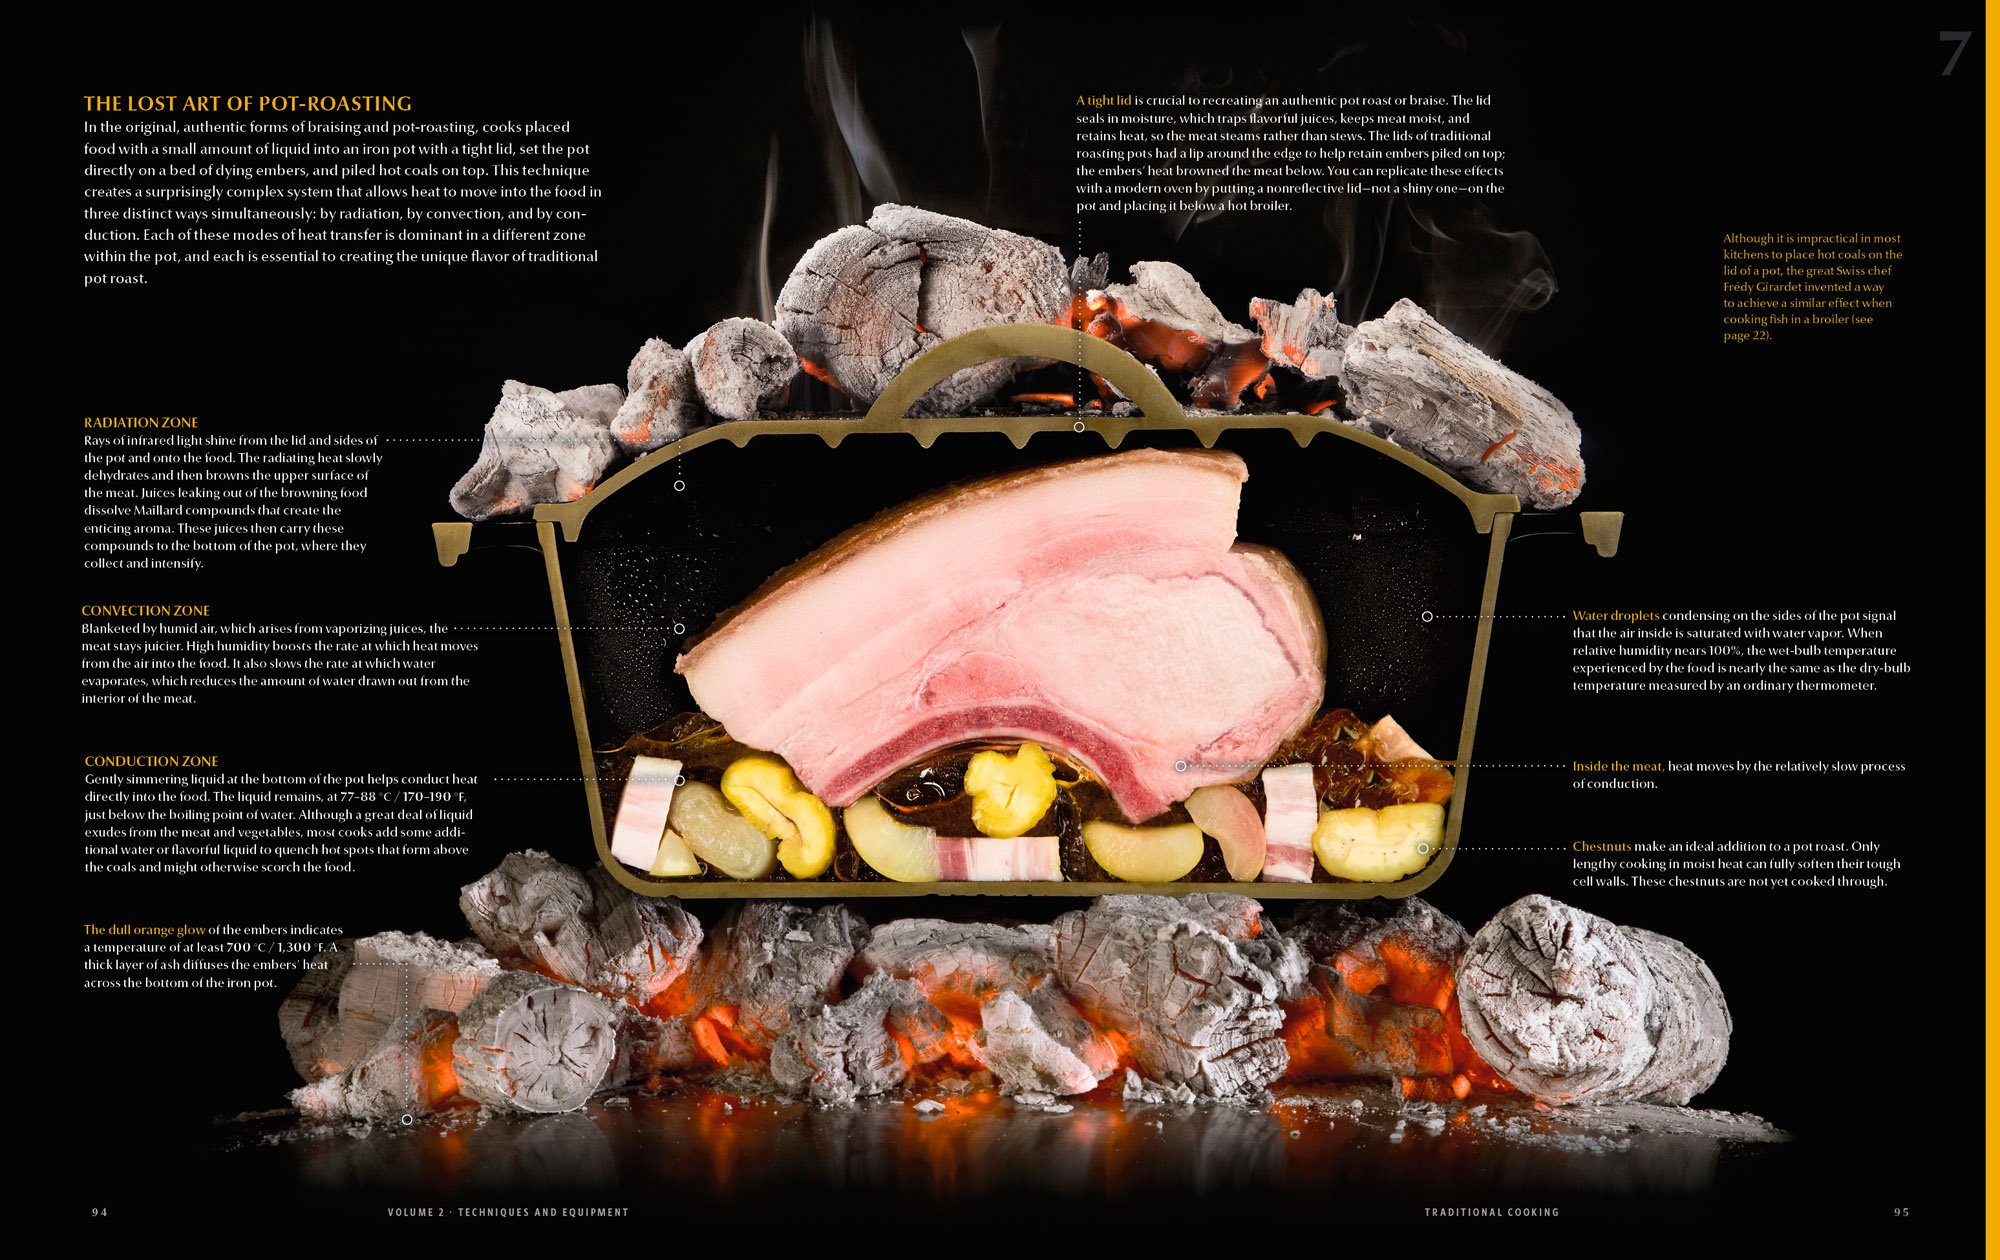 here is a cross section picture of what the cast iron pot in coals.  From Modernist Cuisine, Nathan Myhrvold 